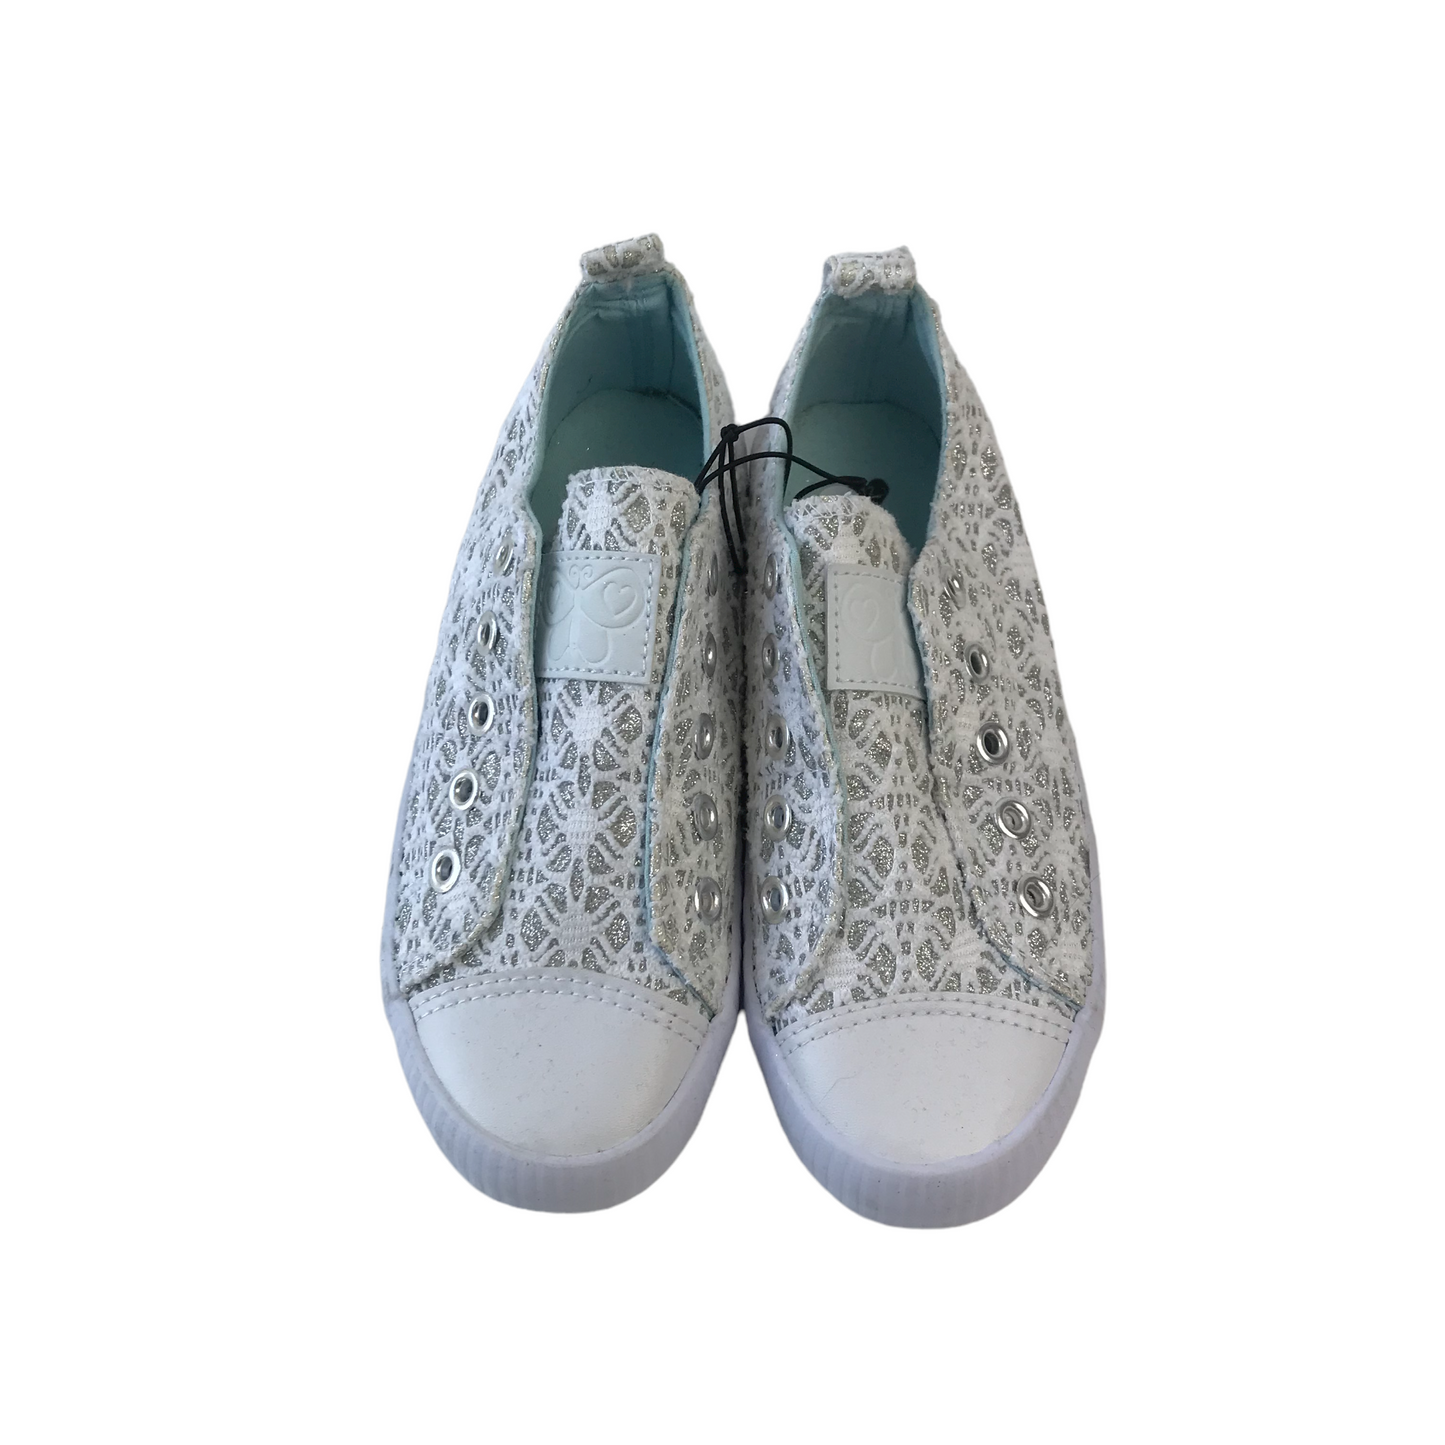 Sparkling White and Silver Trainers Shoe Size 12 (jr)